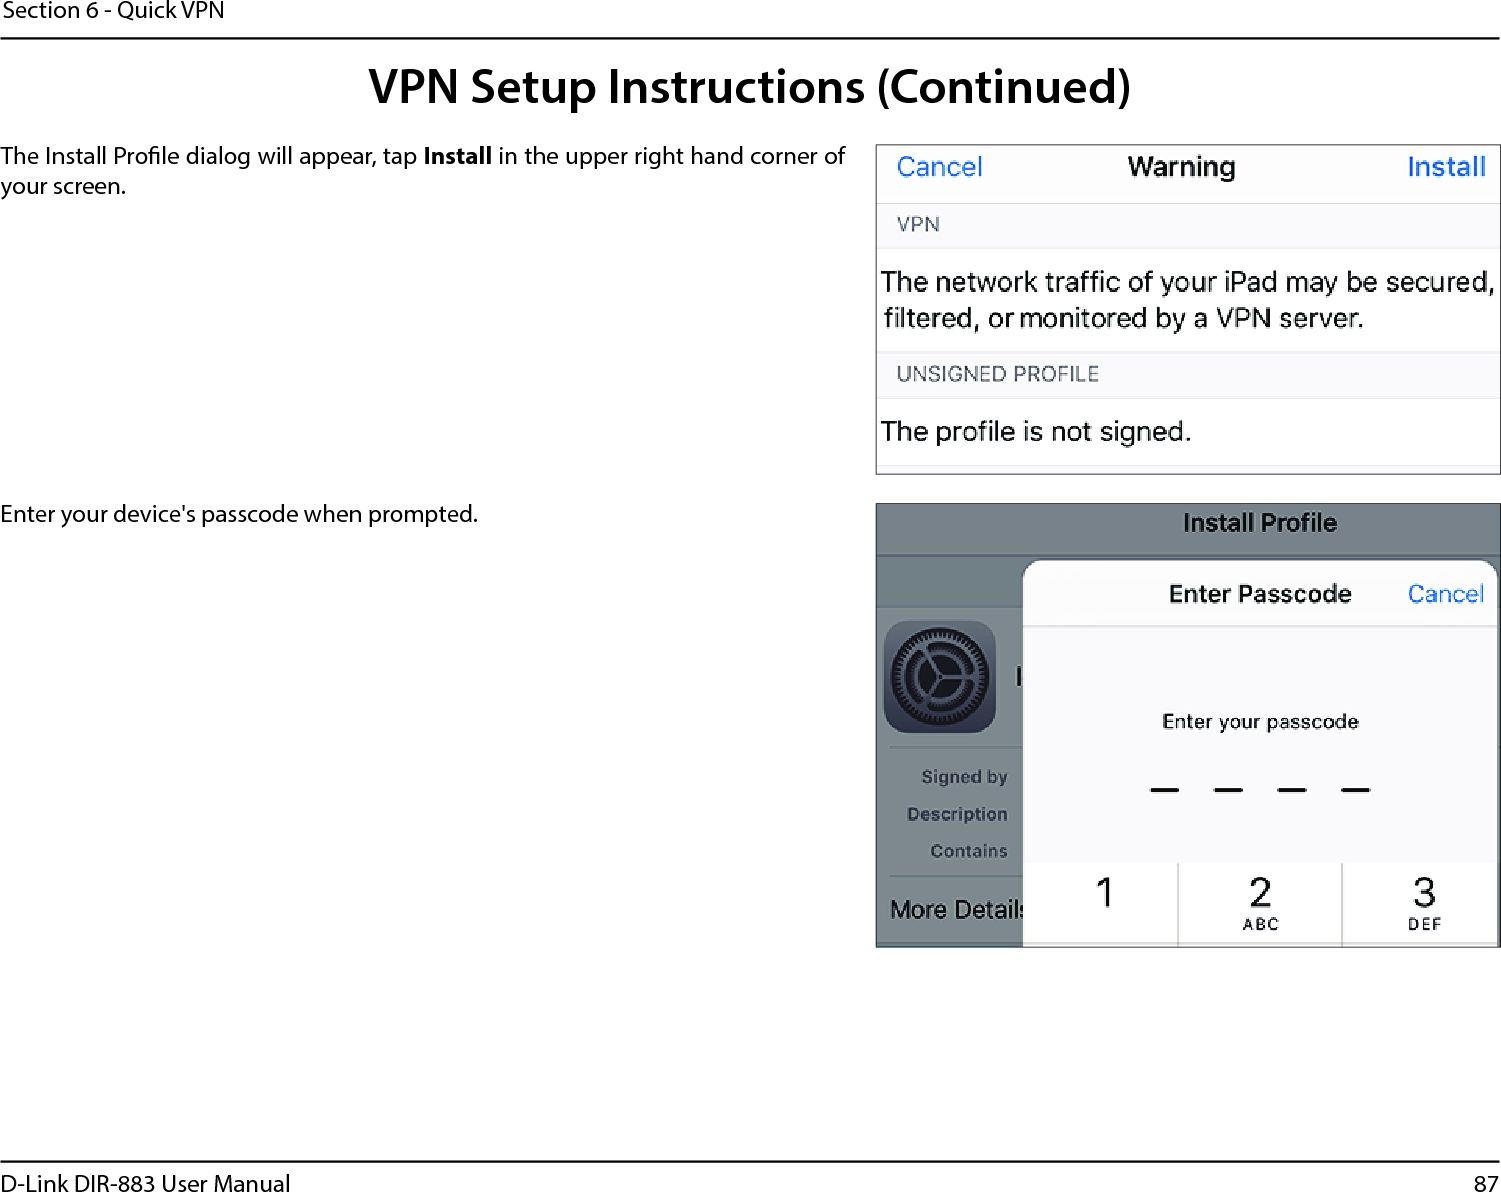 87D-Link DIR-883 User ManualSection 6 - Quick VPNThe Install Prole dialog will appear, tap Install in the upper right hand corner of your screen.Enter your device&apos;s passcode when prompted. VPN Setup Instructions (Continued)